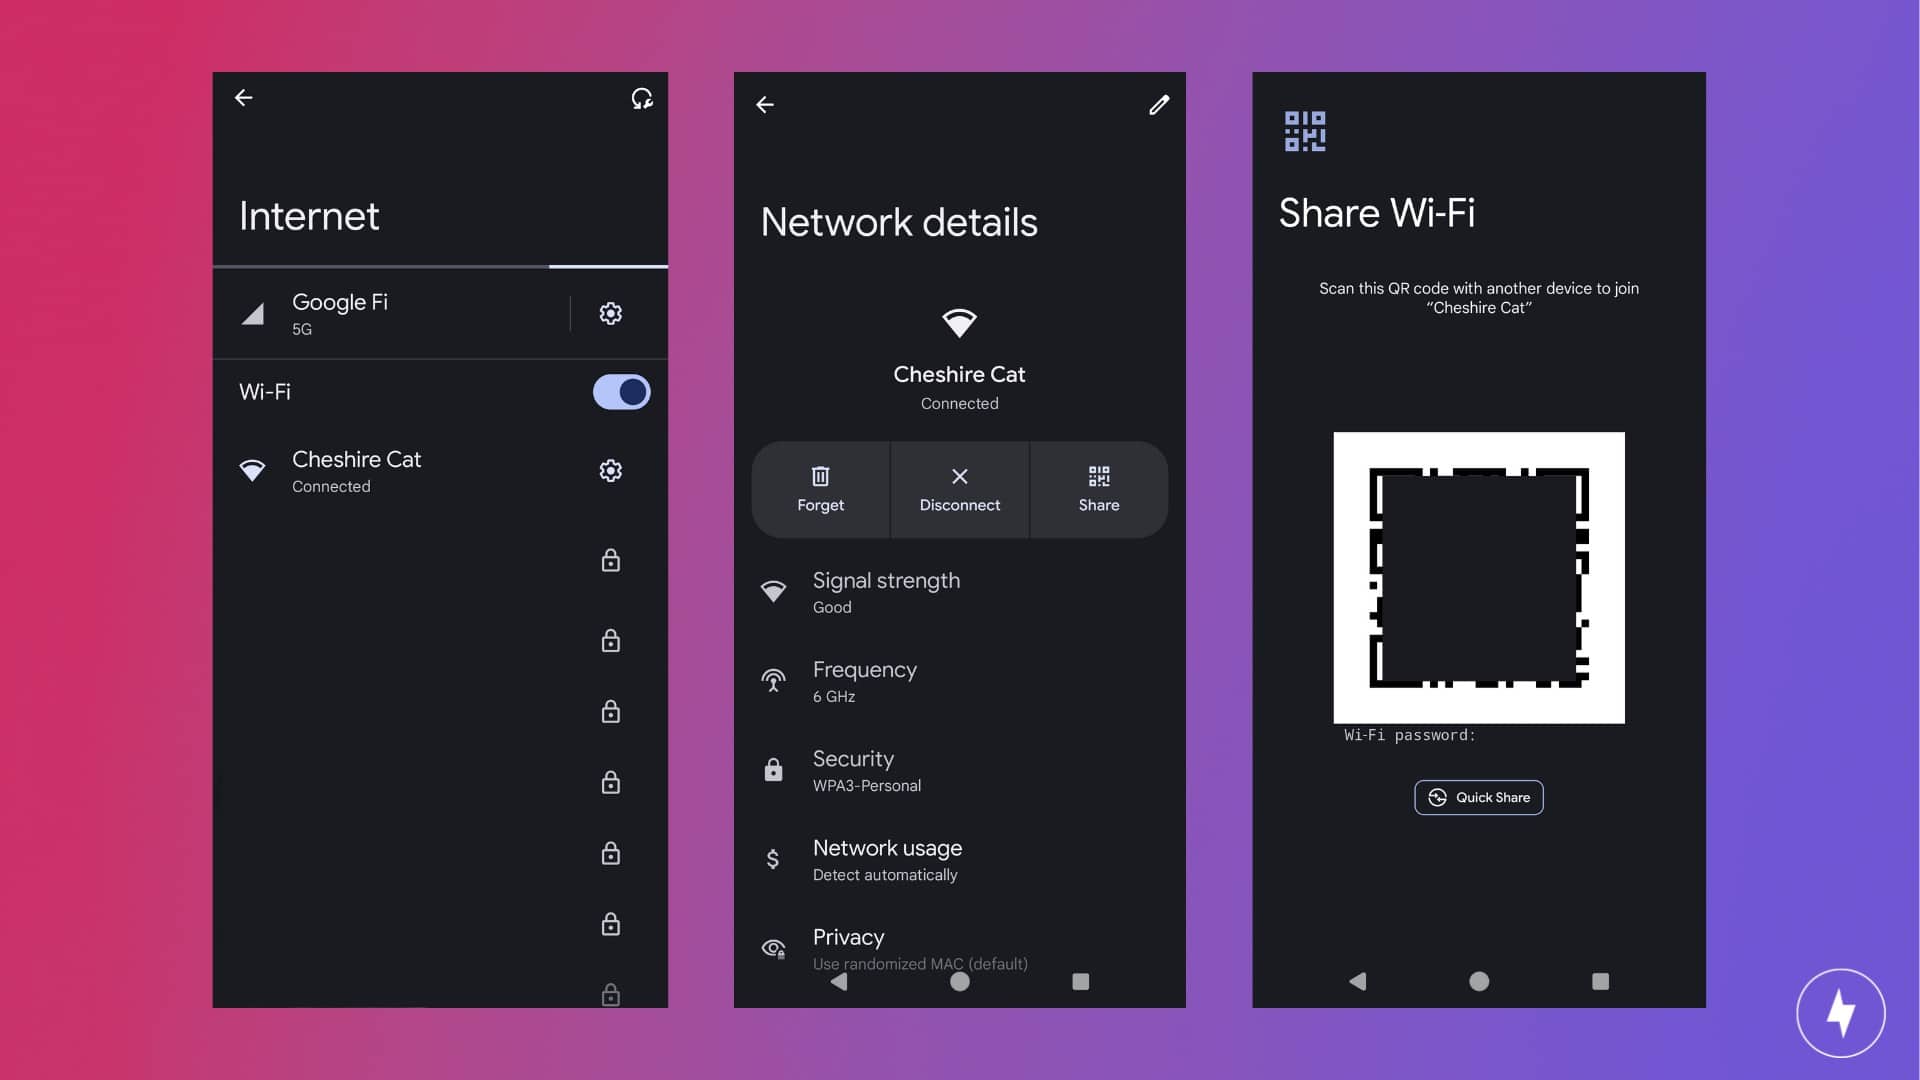 Screenshots of sharing the Wi-Fi password on an Android.